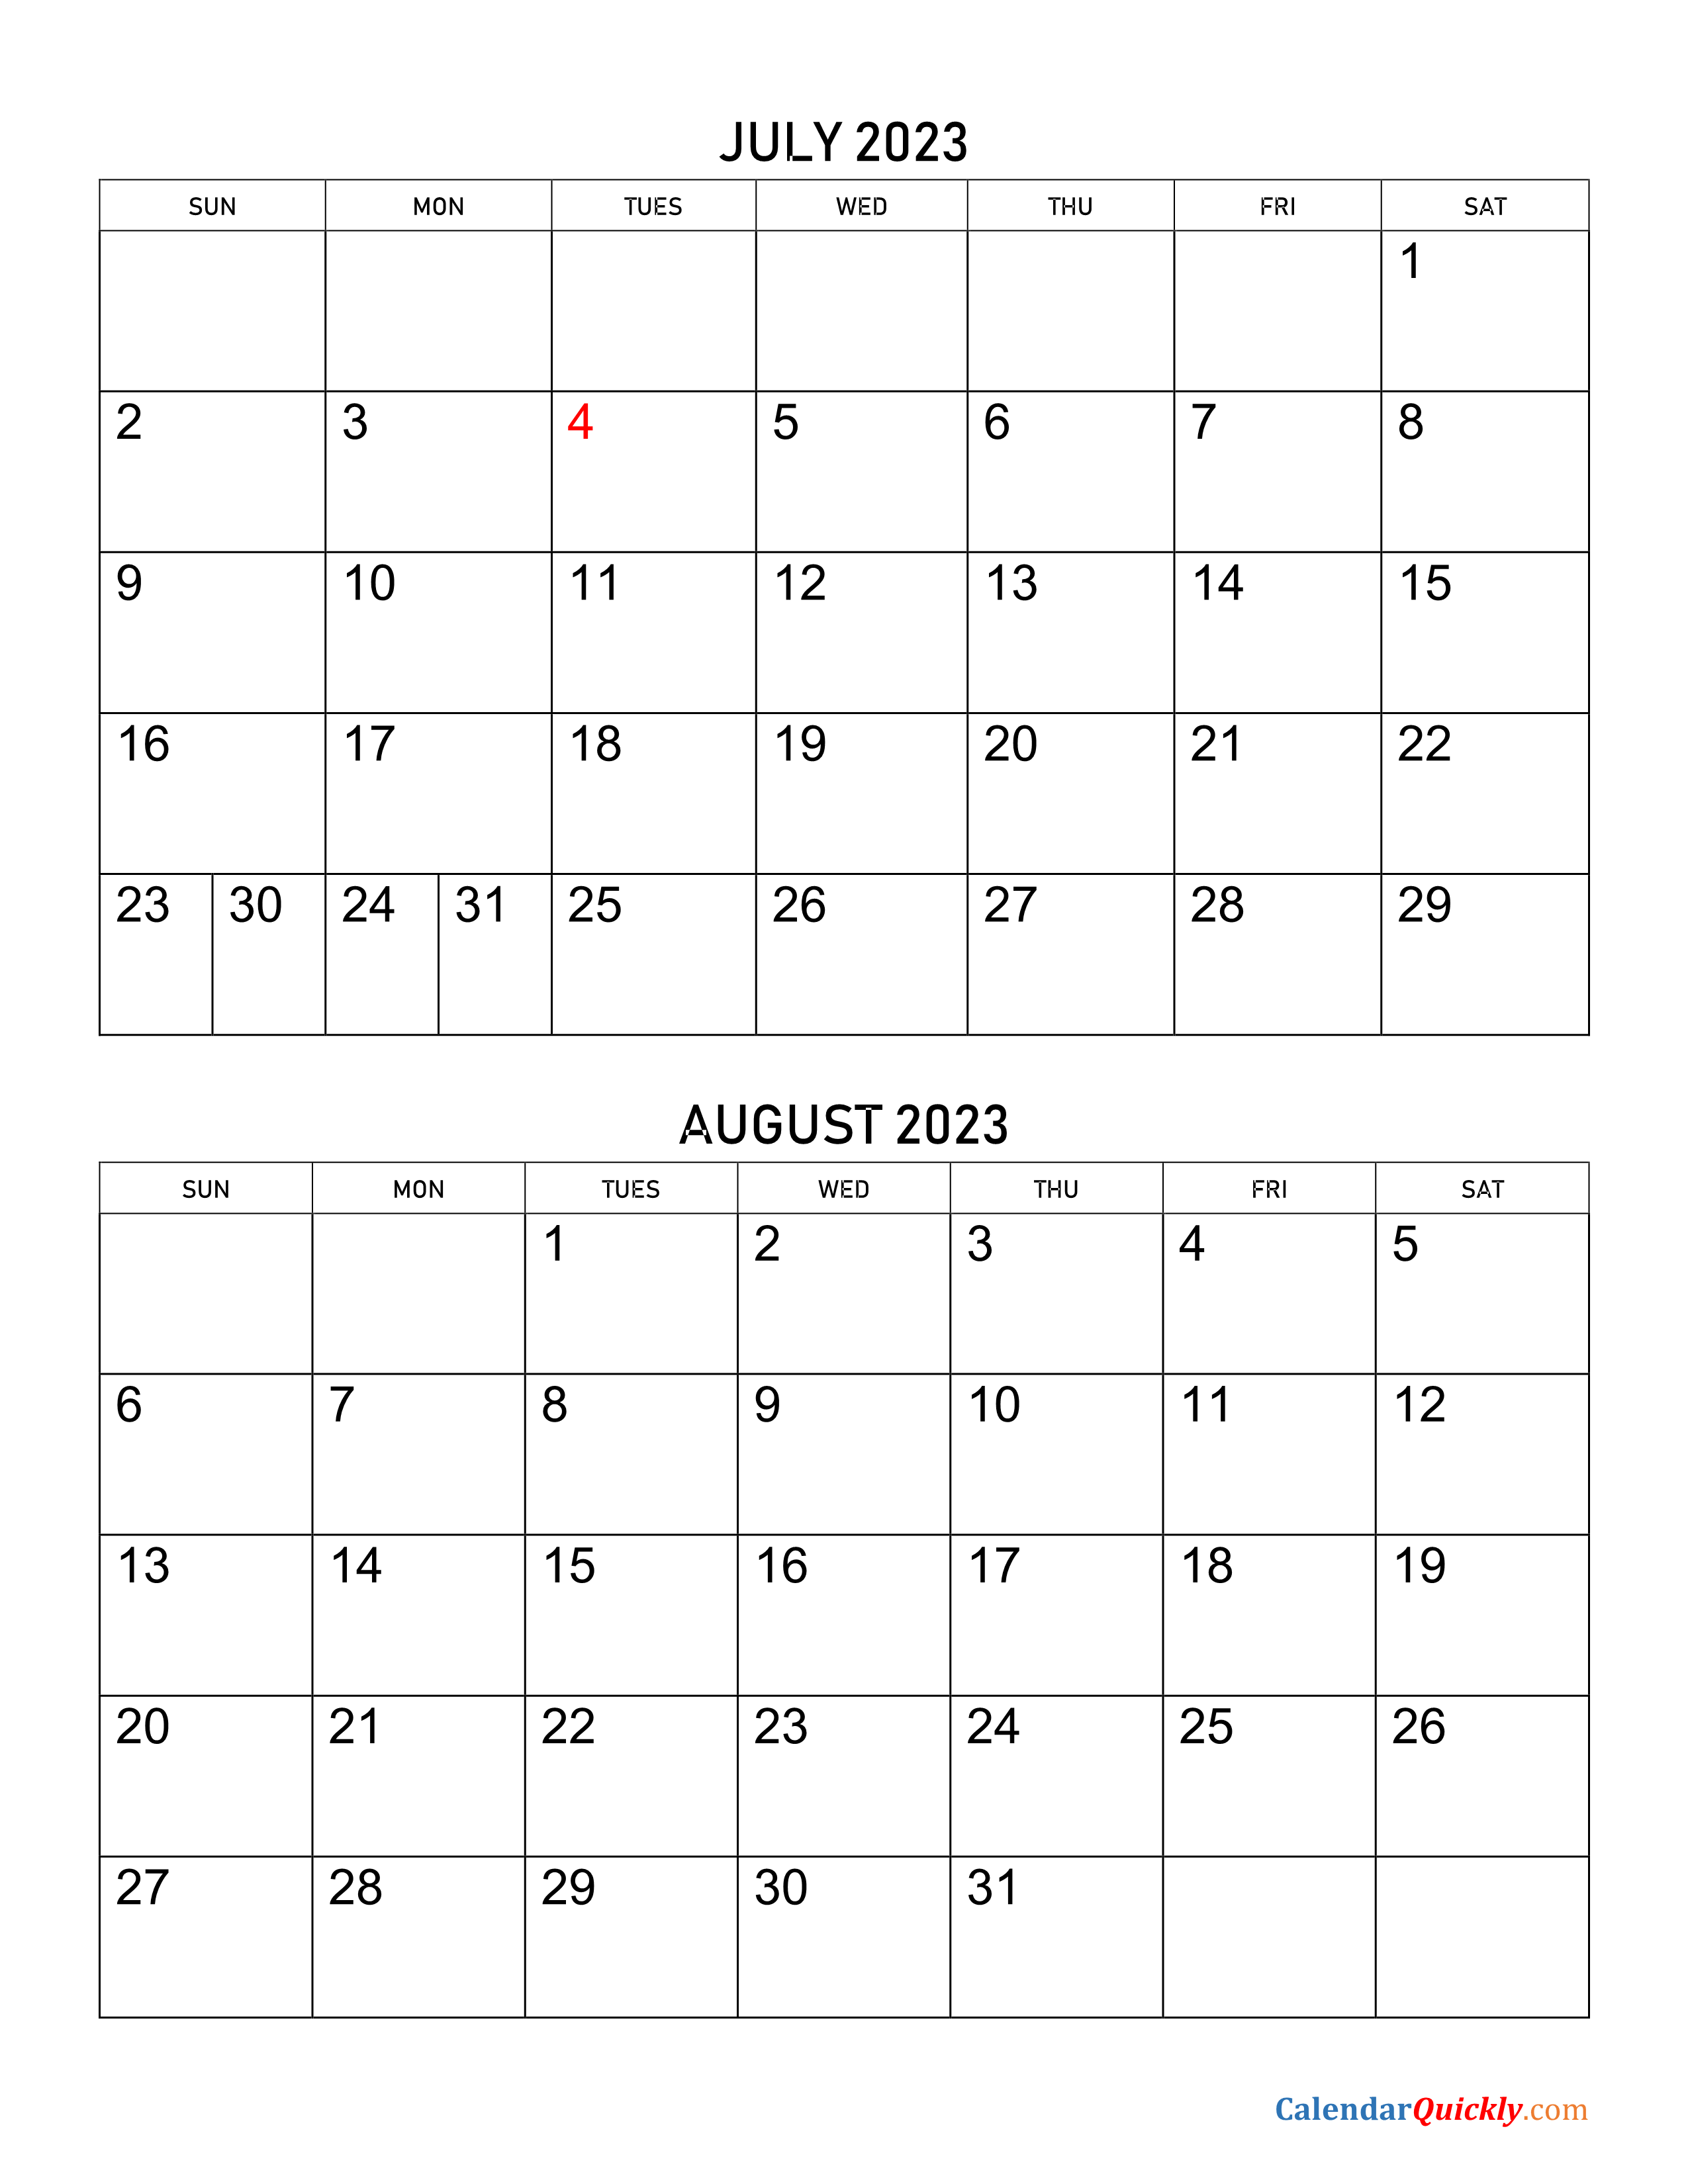 July and August 2023 Calendar Calendar Quickly